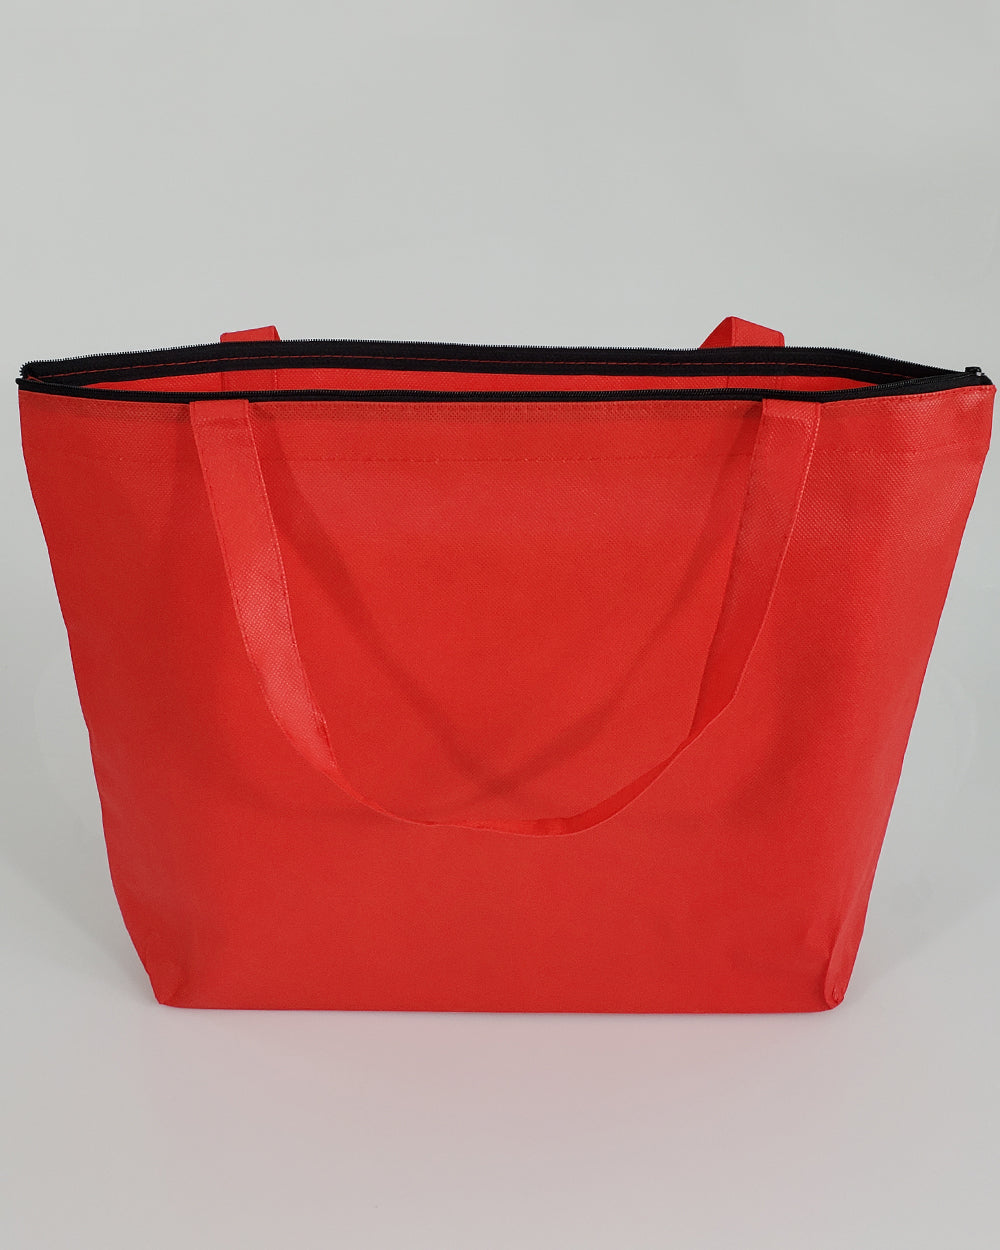 300 ct Zippered Promo Convention Tote Bag with Gusset - By Case